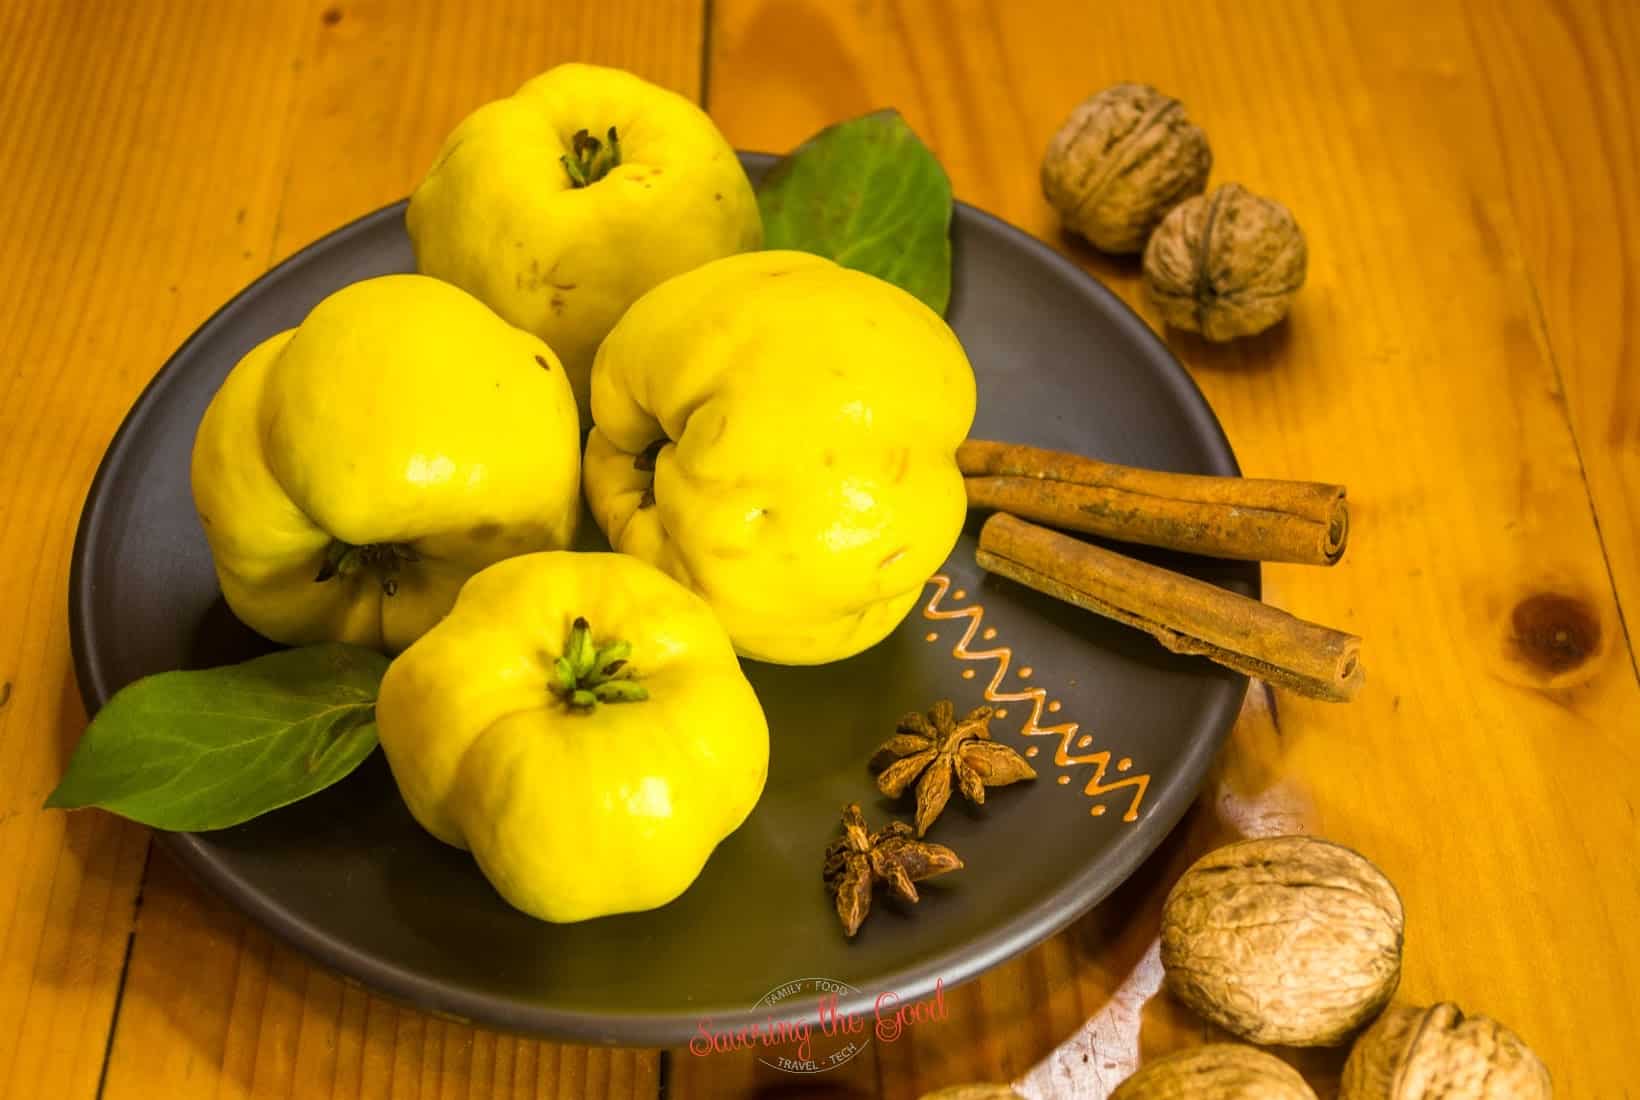 A plate of yellow quince fruits and nuts on a wooden table.